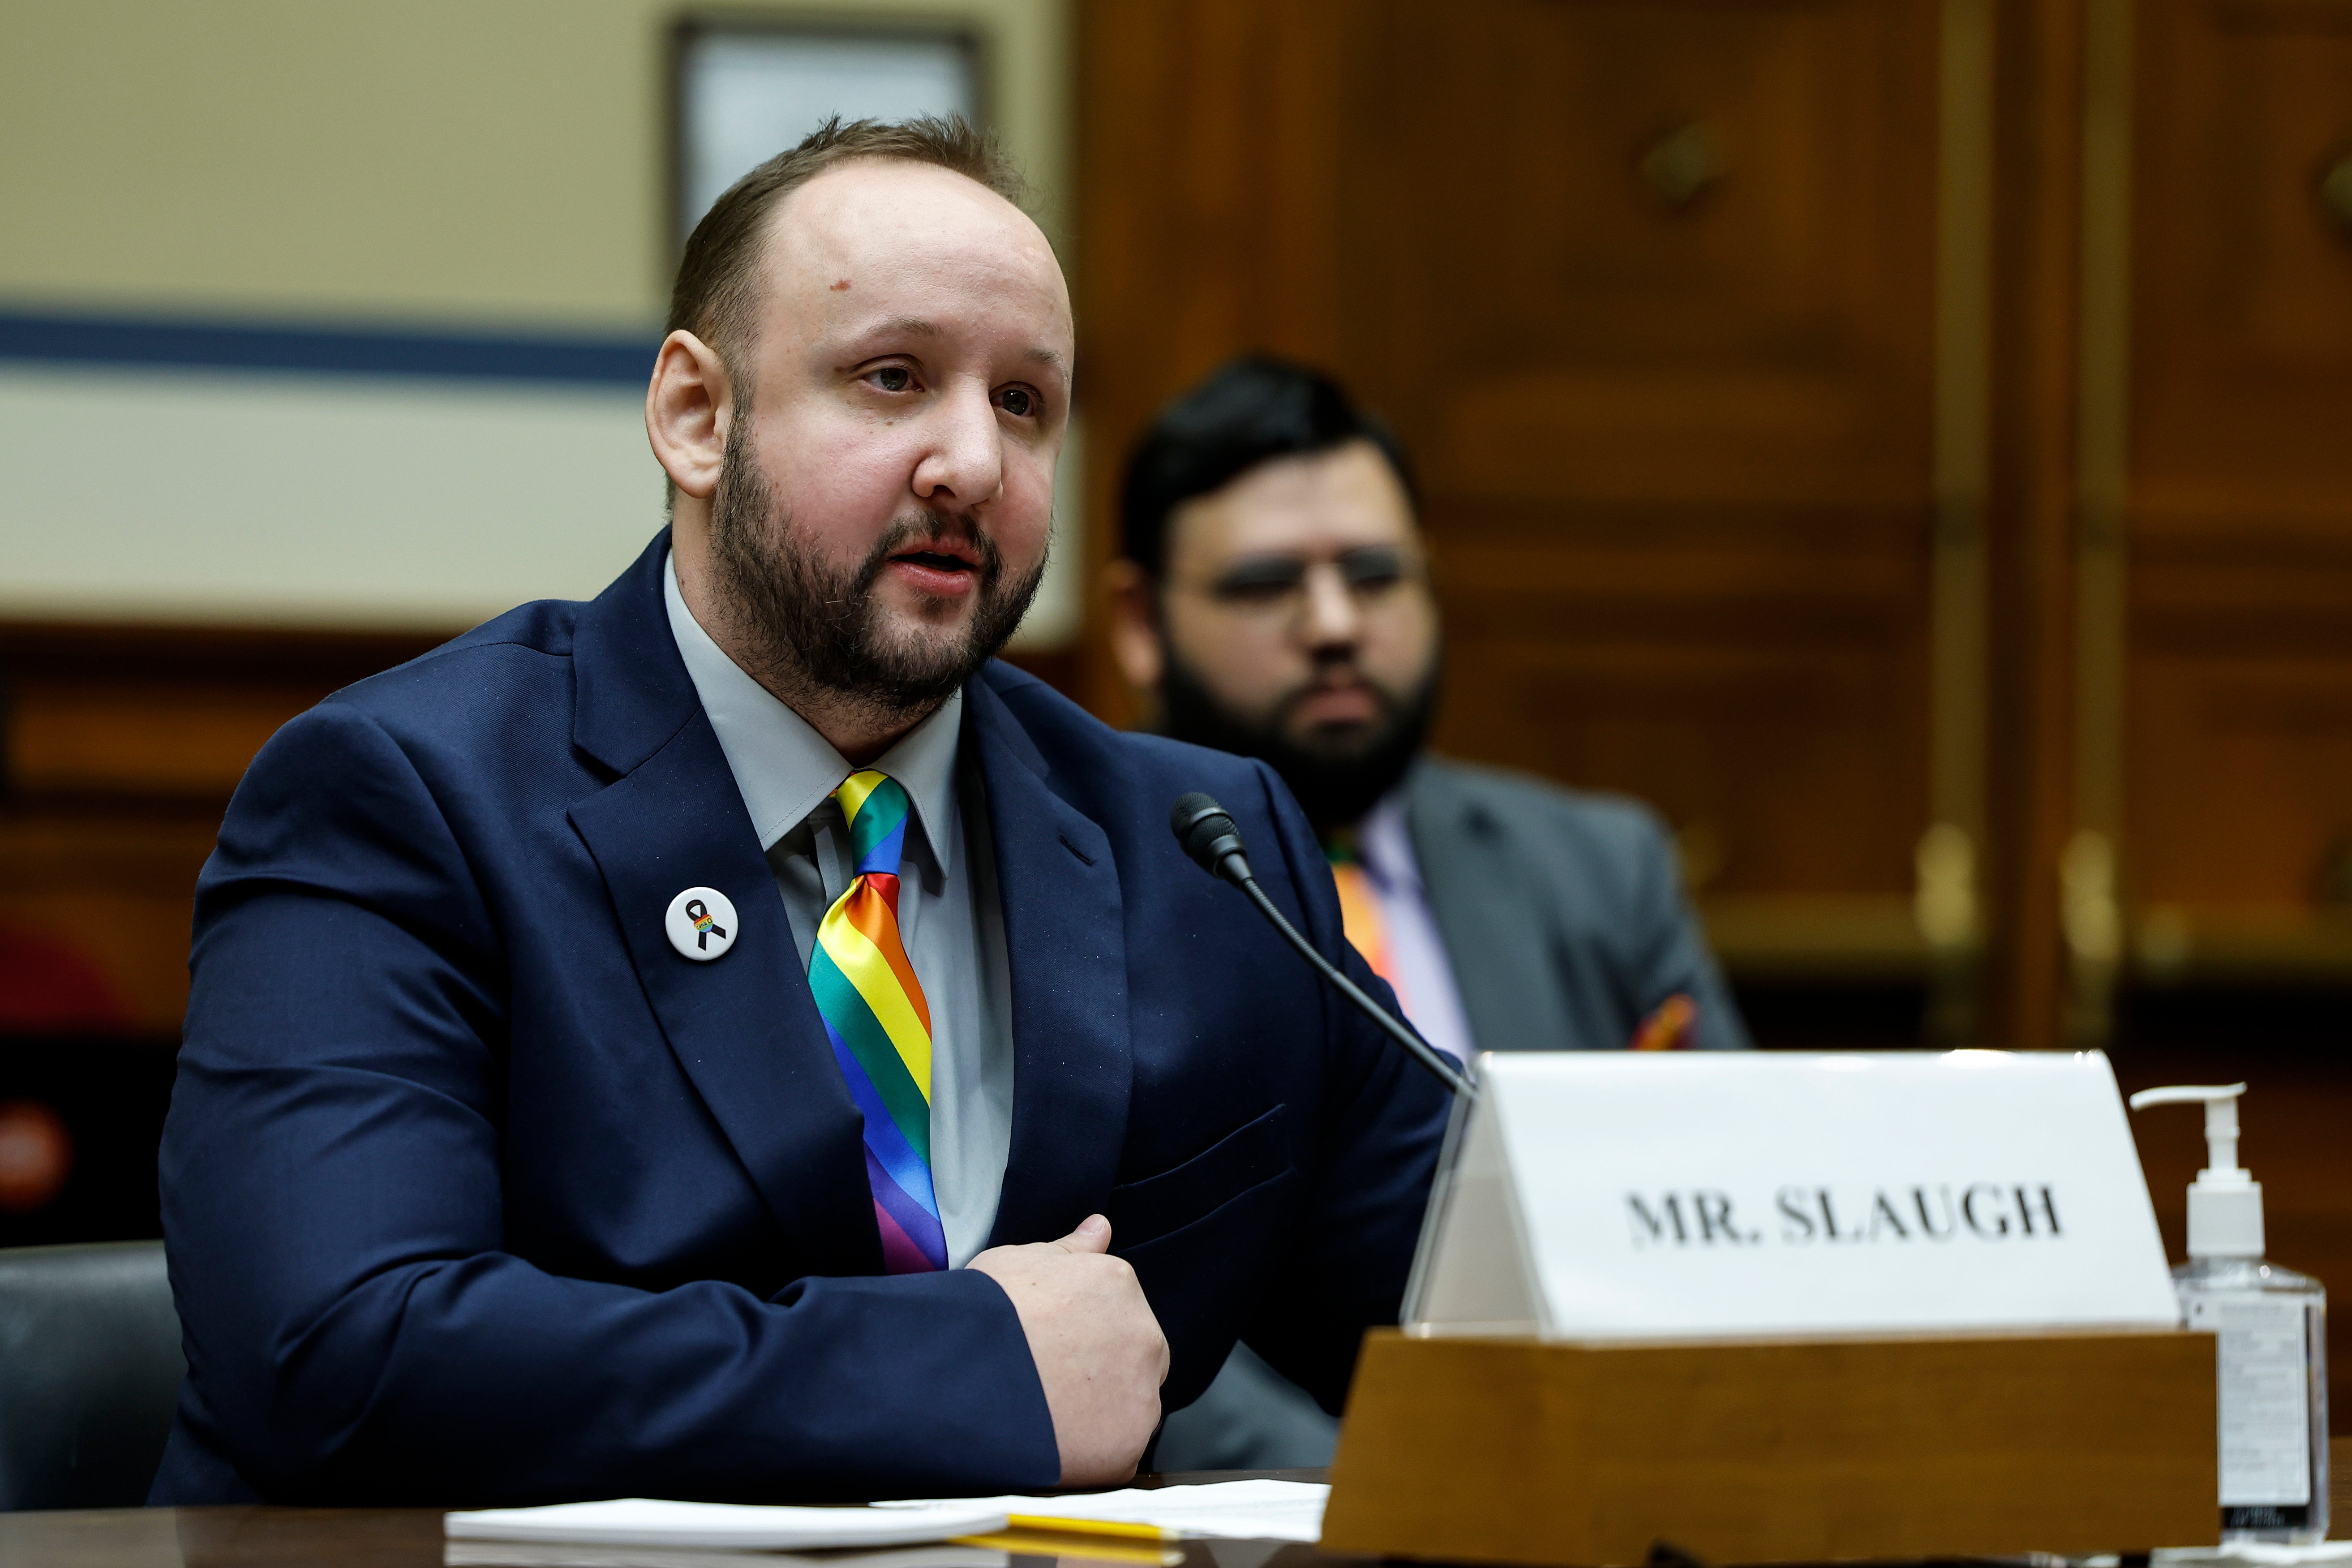 Club Q mass shooting survivor James Slaugh testifies to the House Oversight Committee on 14 December.